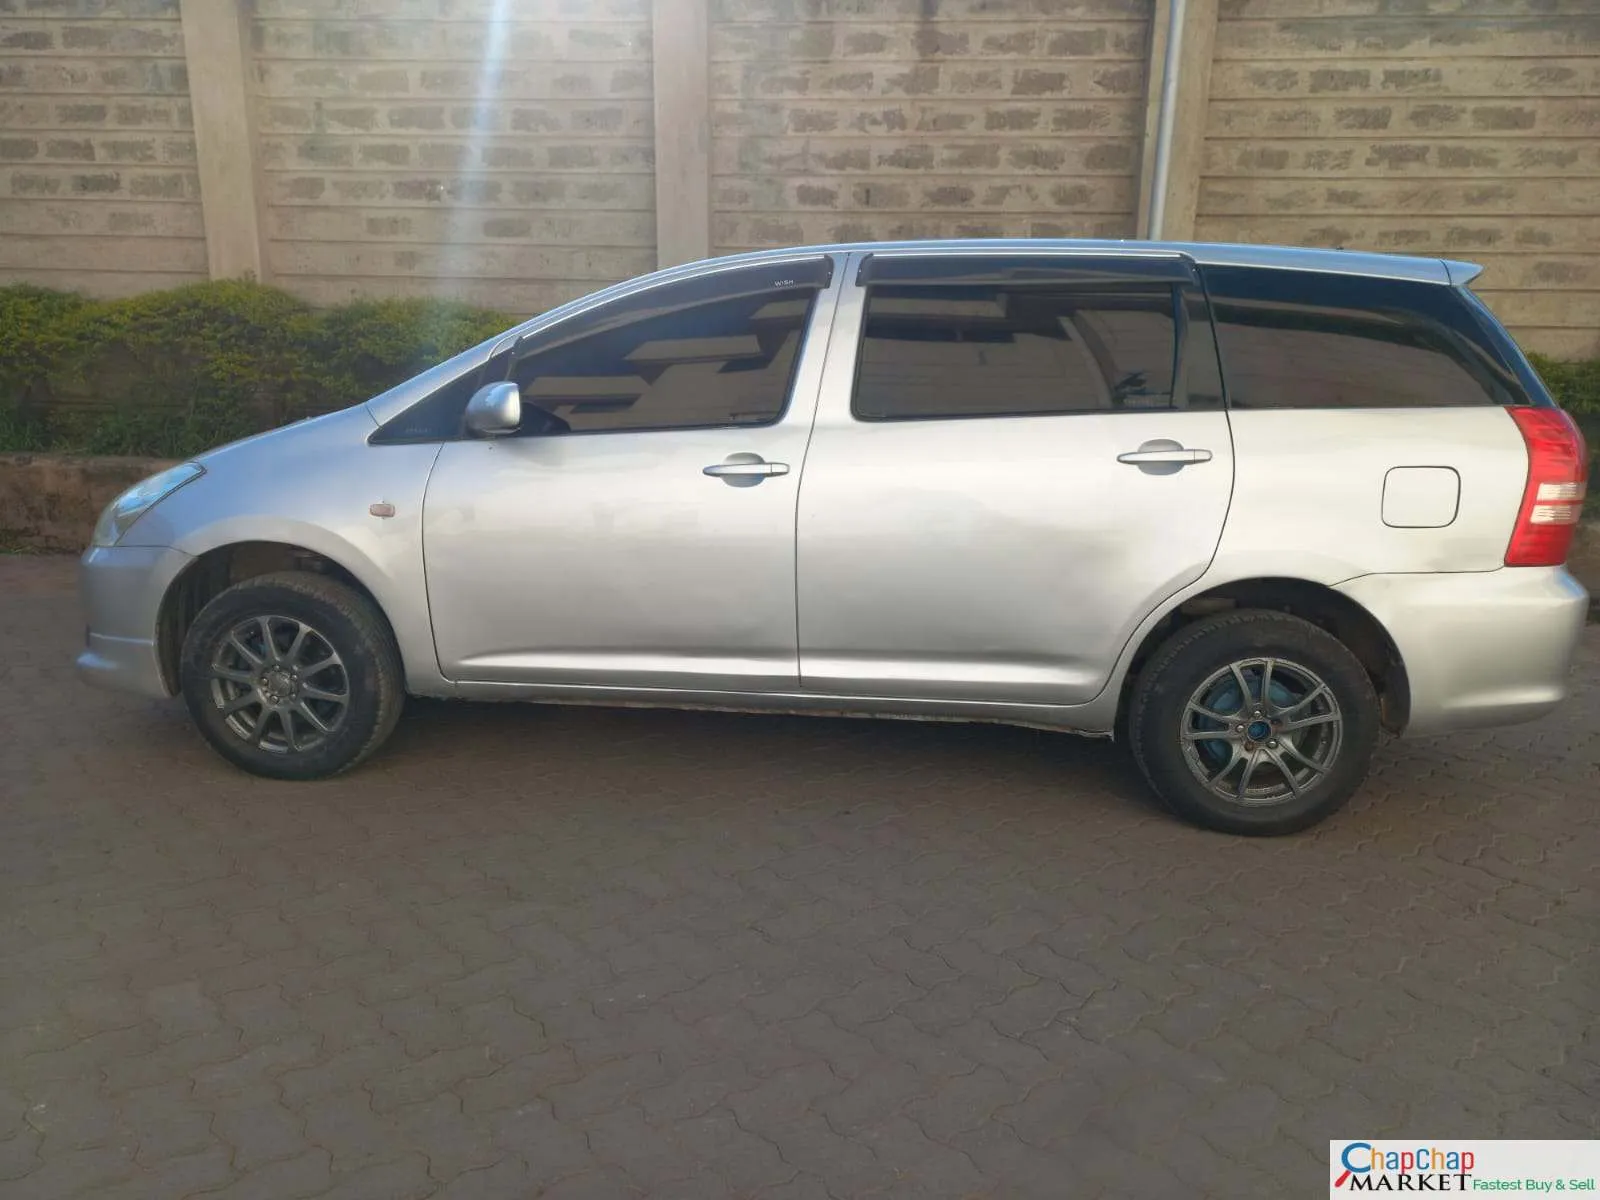 Cars Cars For Sale/Vehicles-Toyota WISH QUICKEST SALE You Pay 30% Deposit Trade in OK EXCLUSIVE 9